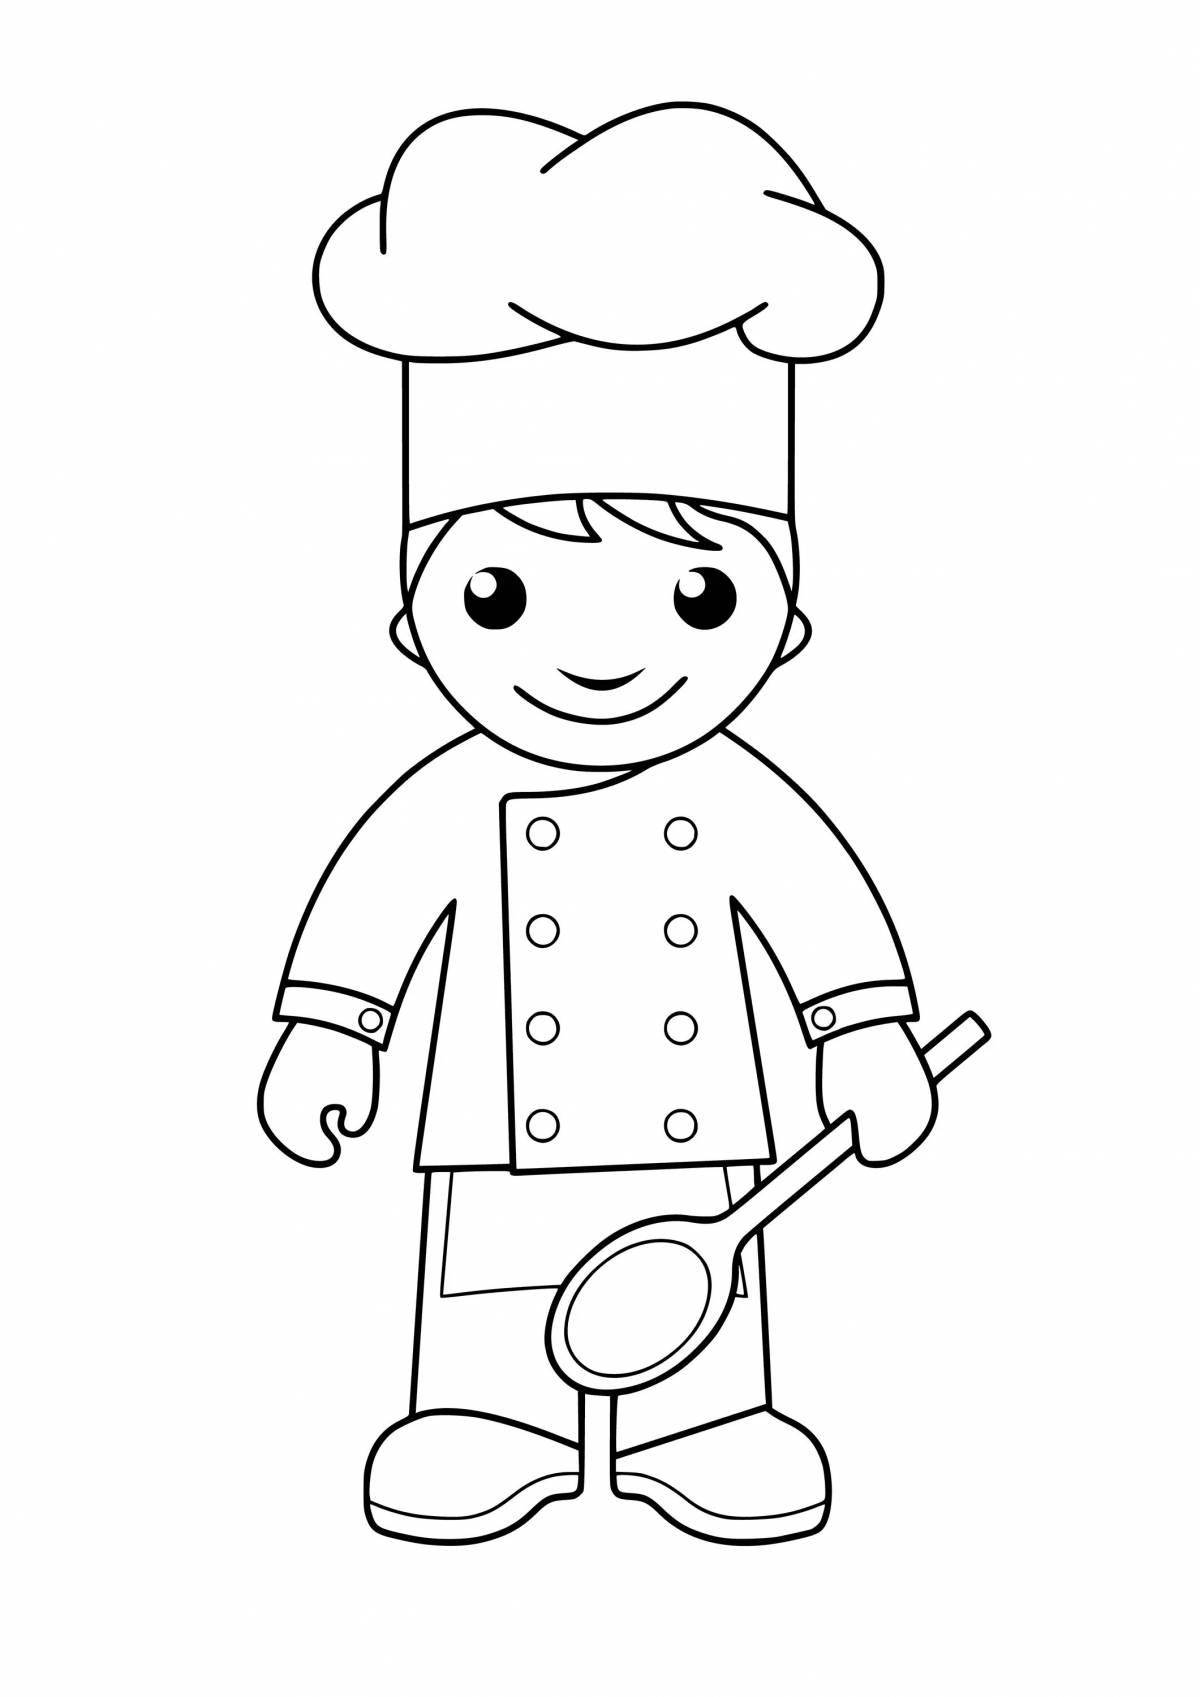 Colour coloring of cooks for kindergarten